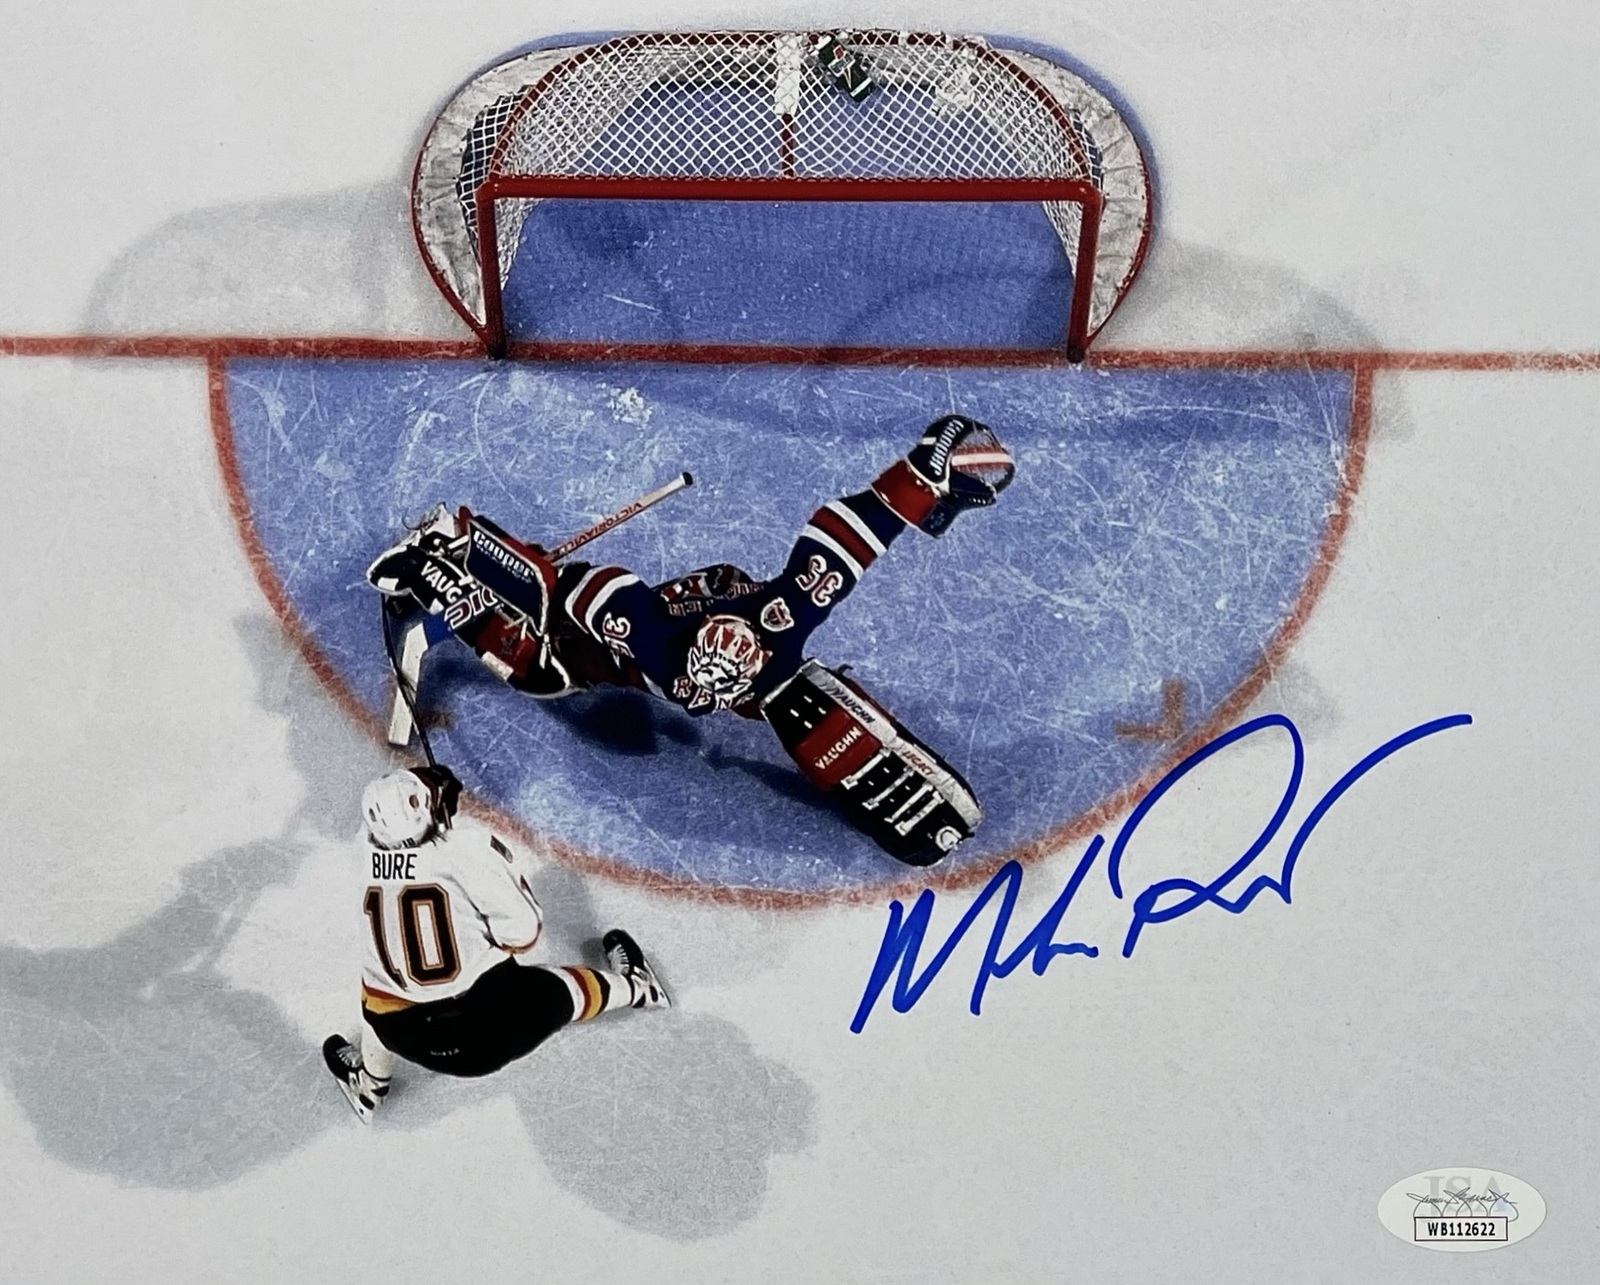 Primary image for MIKE RICHTER Autograph SIGNED 8x10 PHOTO N.Y. RANGERS GOALIE JSA CERT WB112622